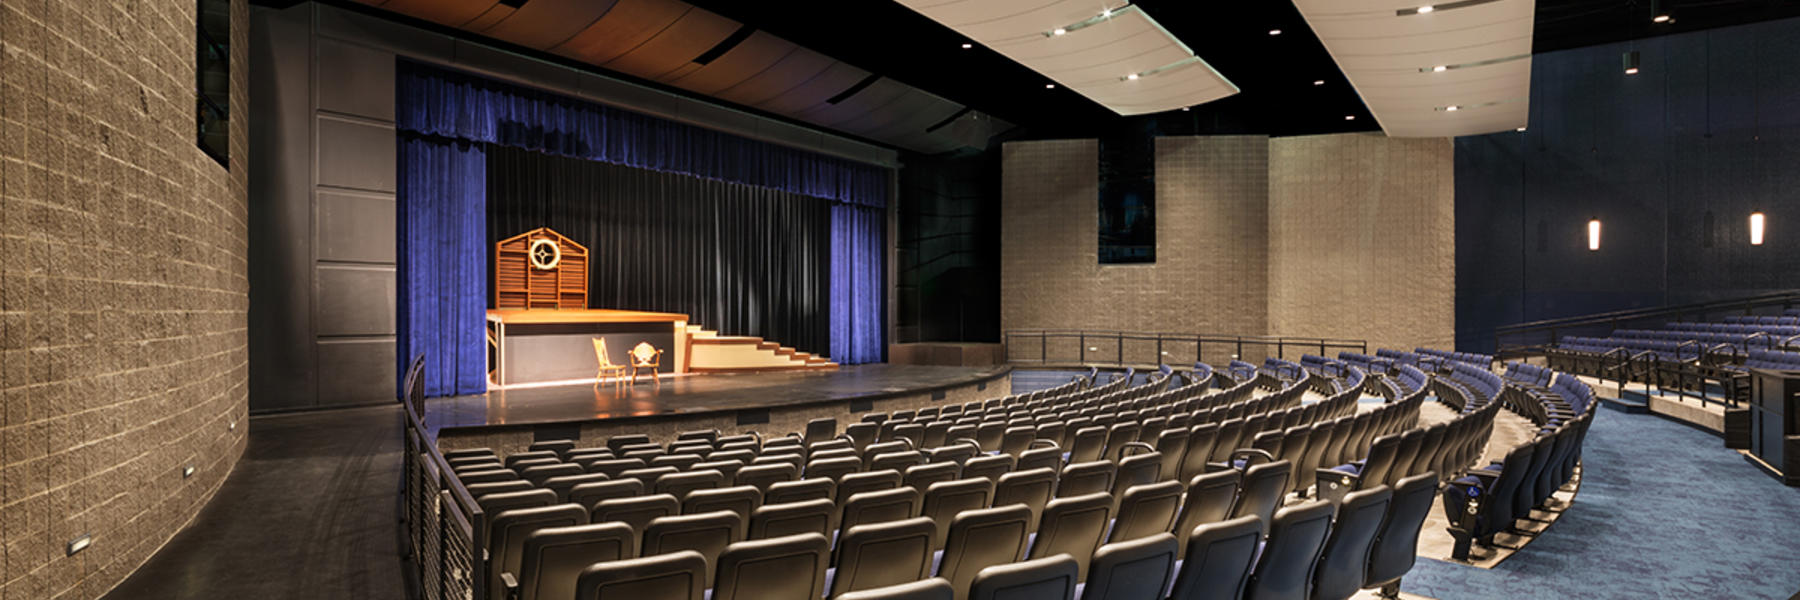 Lake Zurich Performing Arts Center Seating Chart